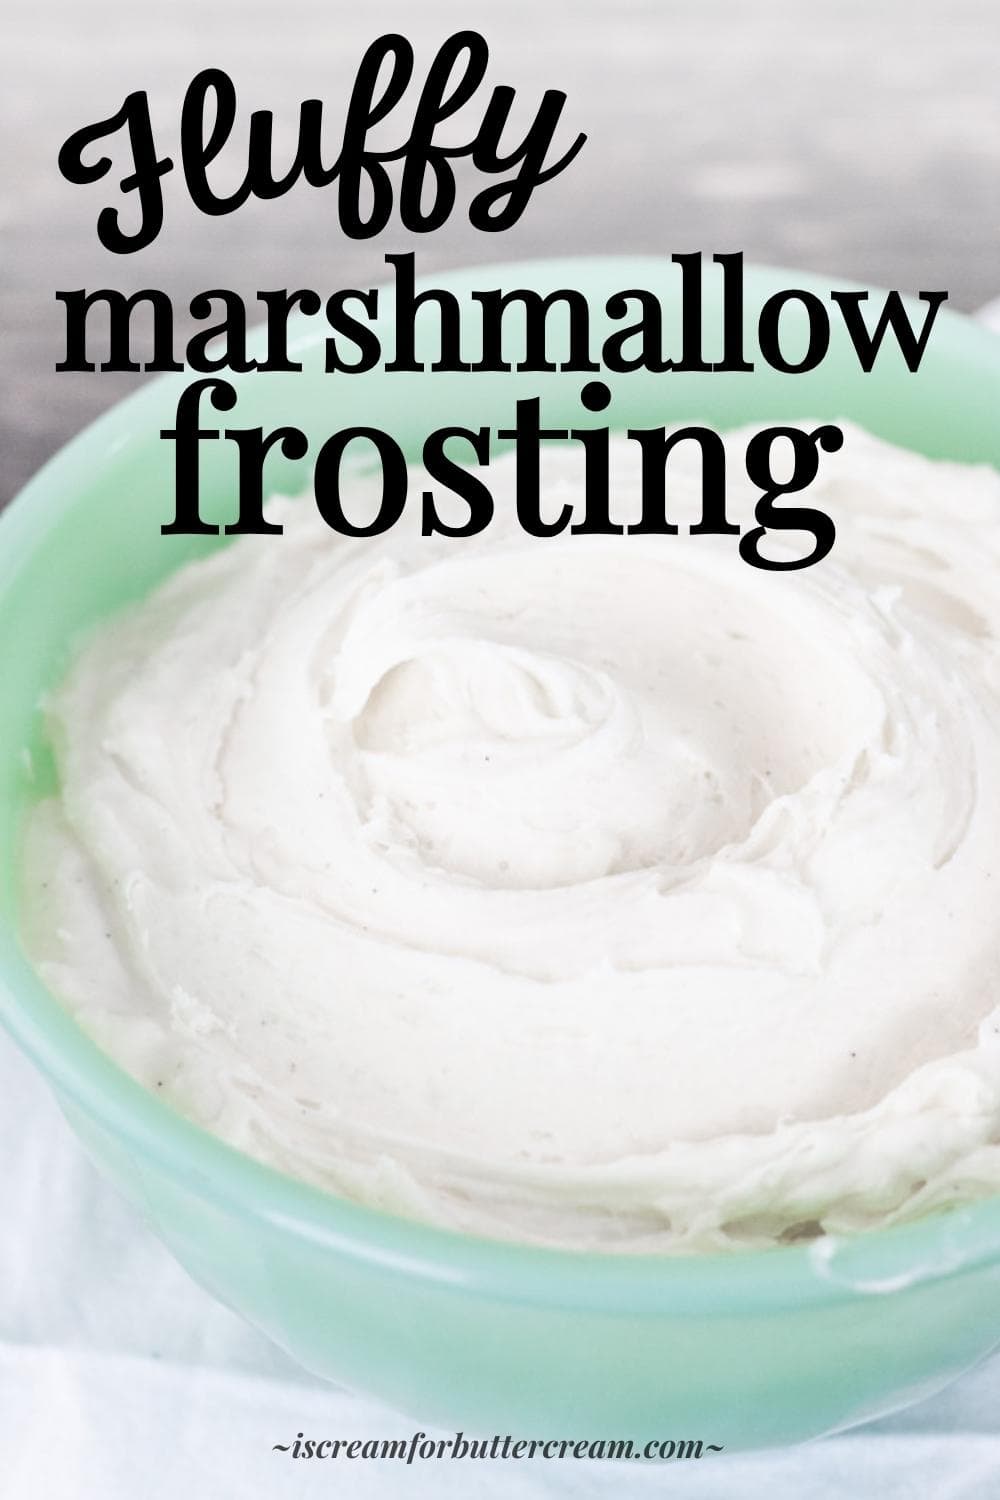 Pin with close up of fluffy marshmallow frosting in a green bowl with text overlay.